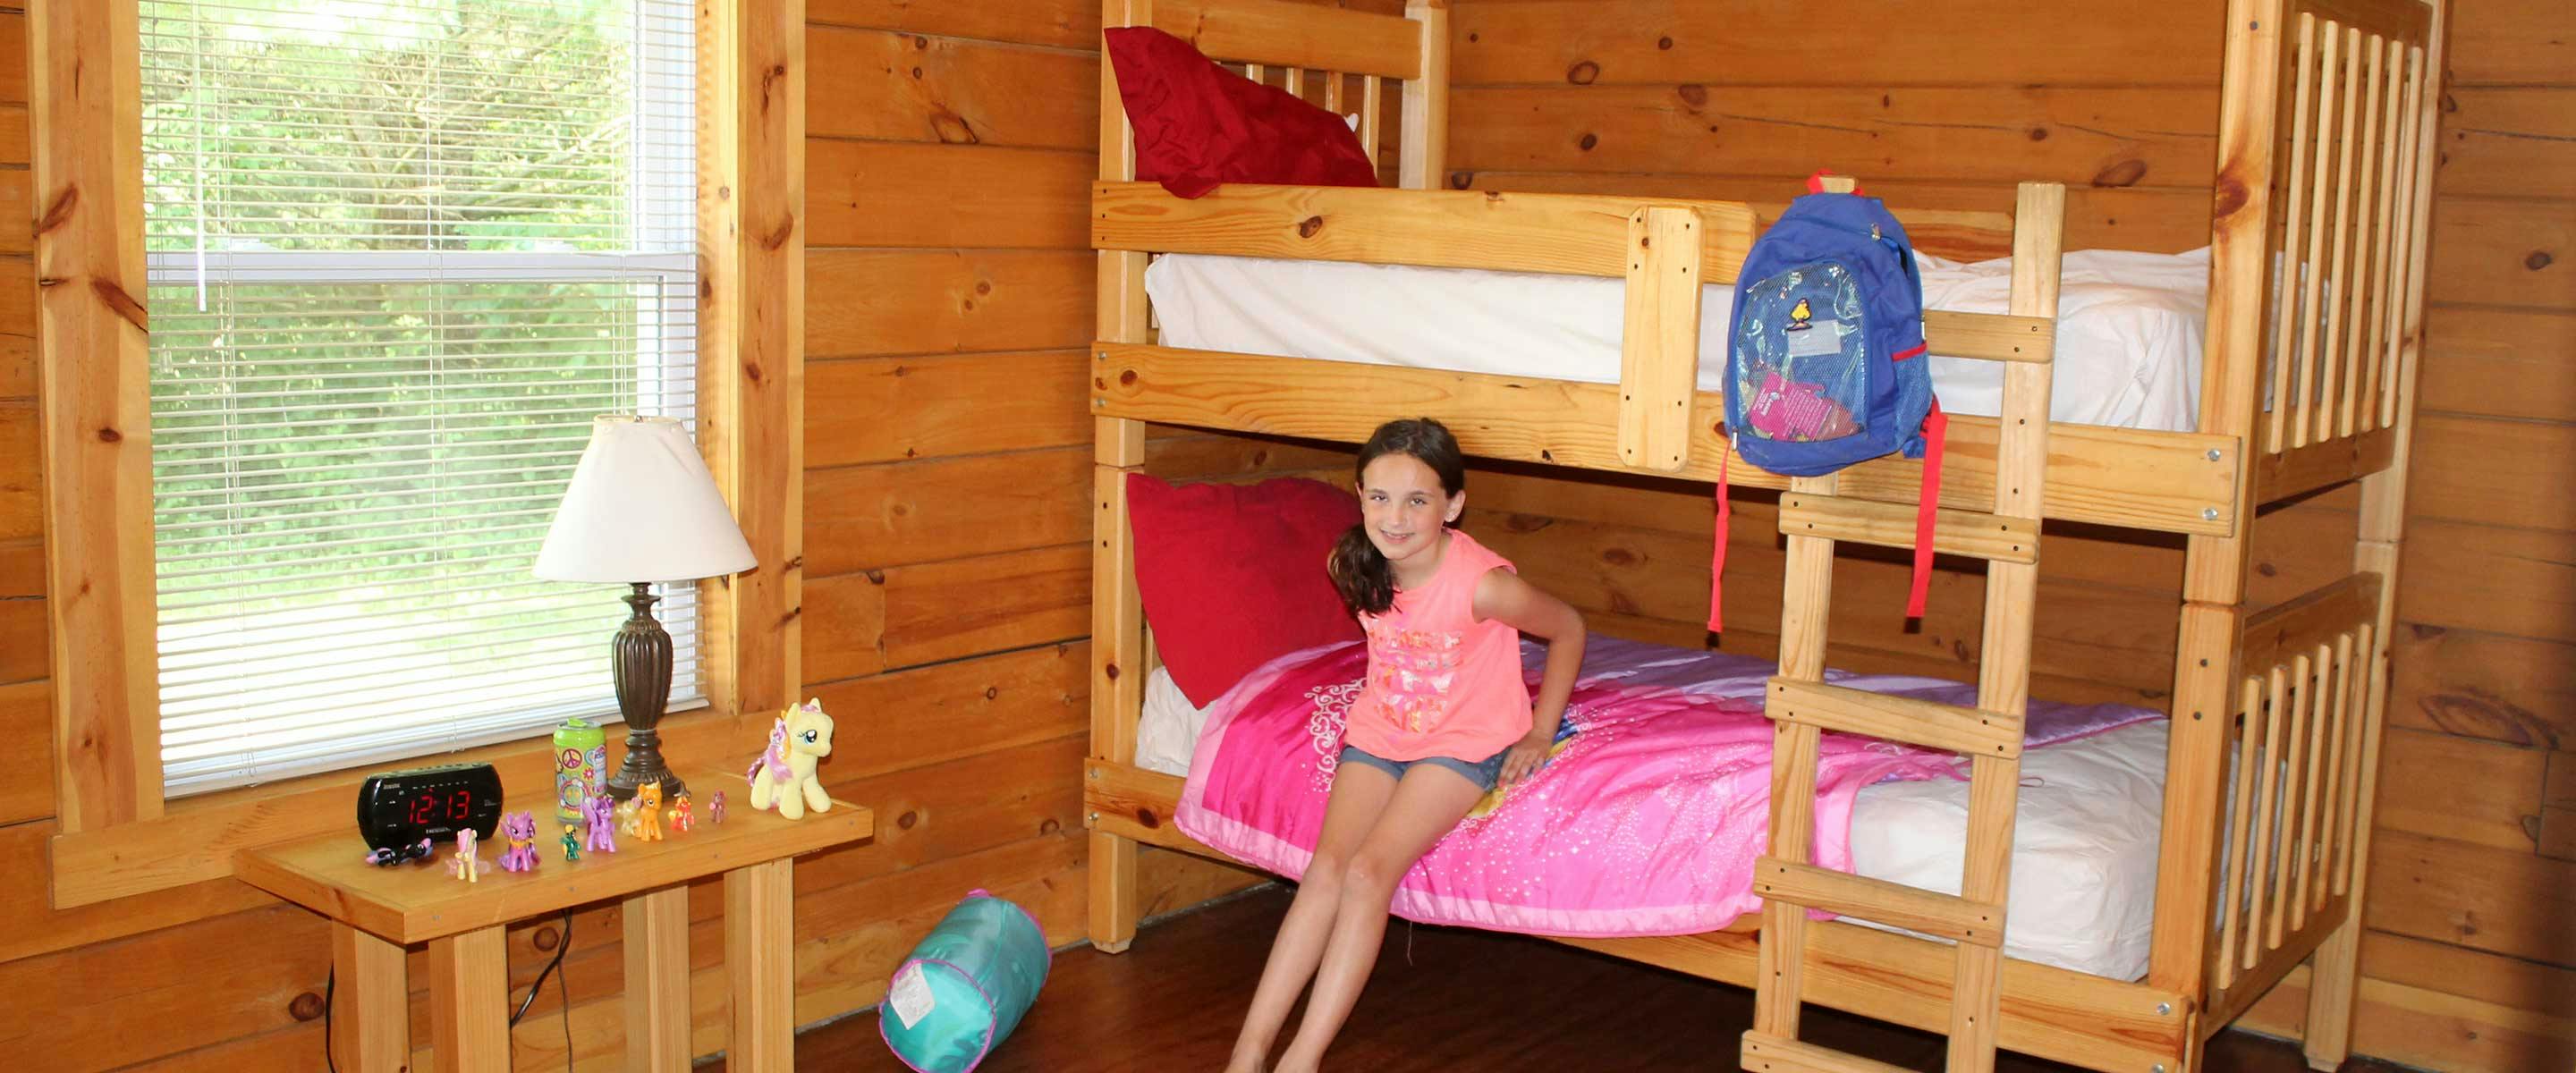 girl leading against bunk bed in cabin